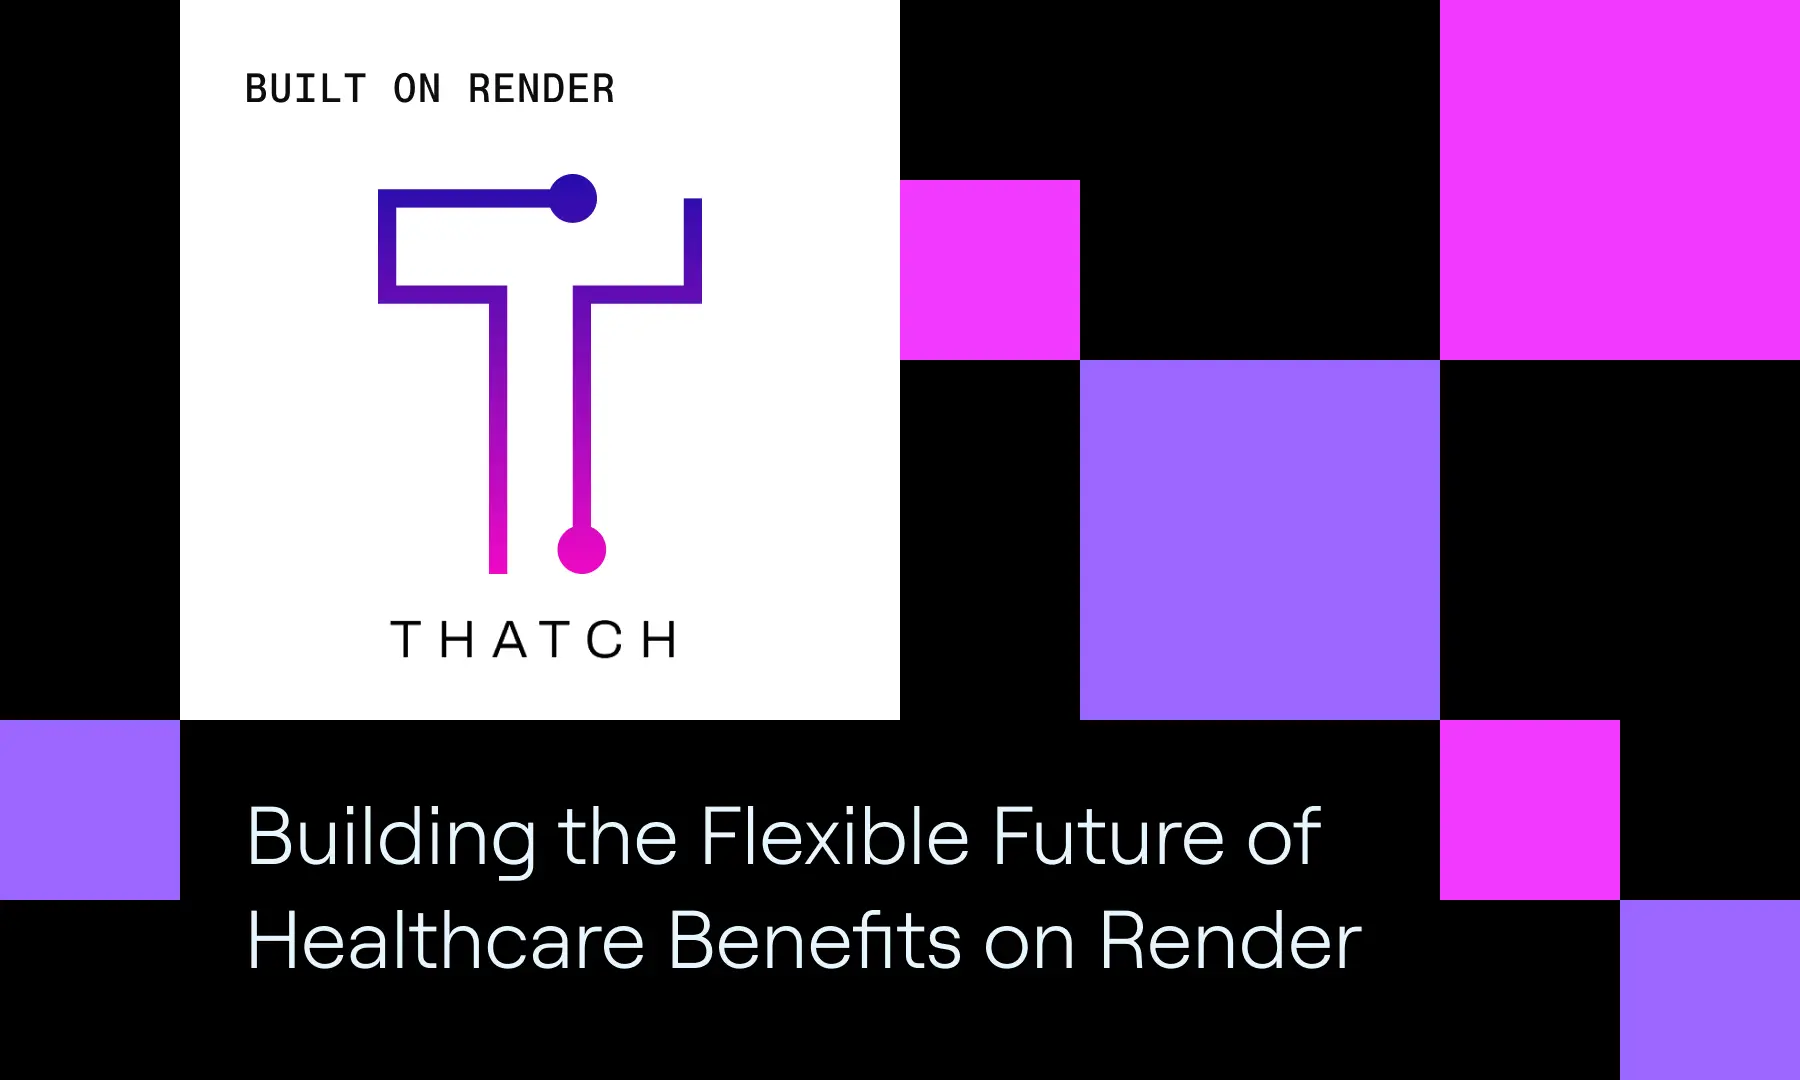 How Thatch is Building the Flexible Future of Healthcare Benefits on Render